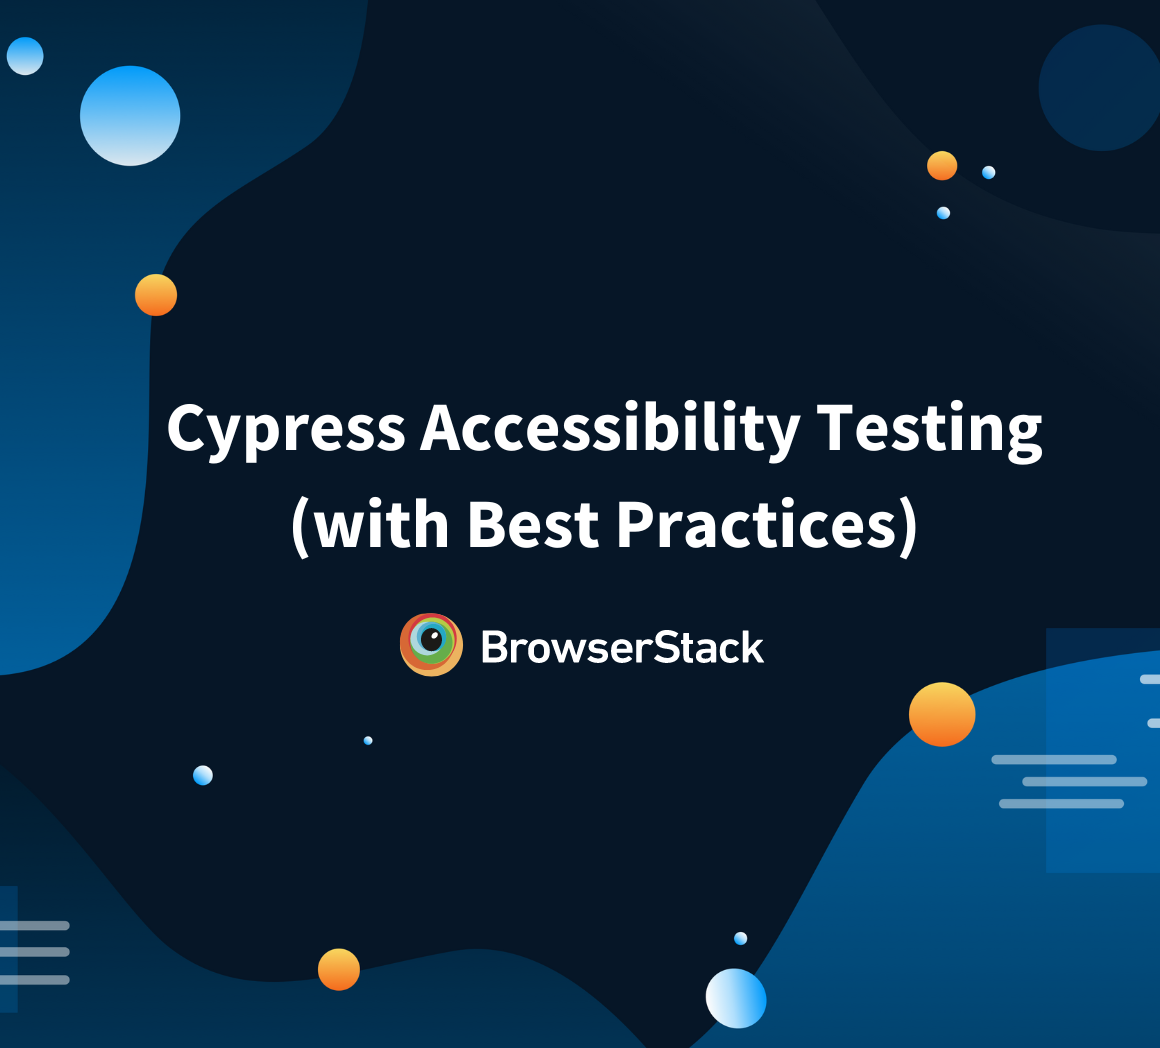 Cypress Accessibility Testing (with Best Practices)